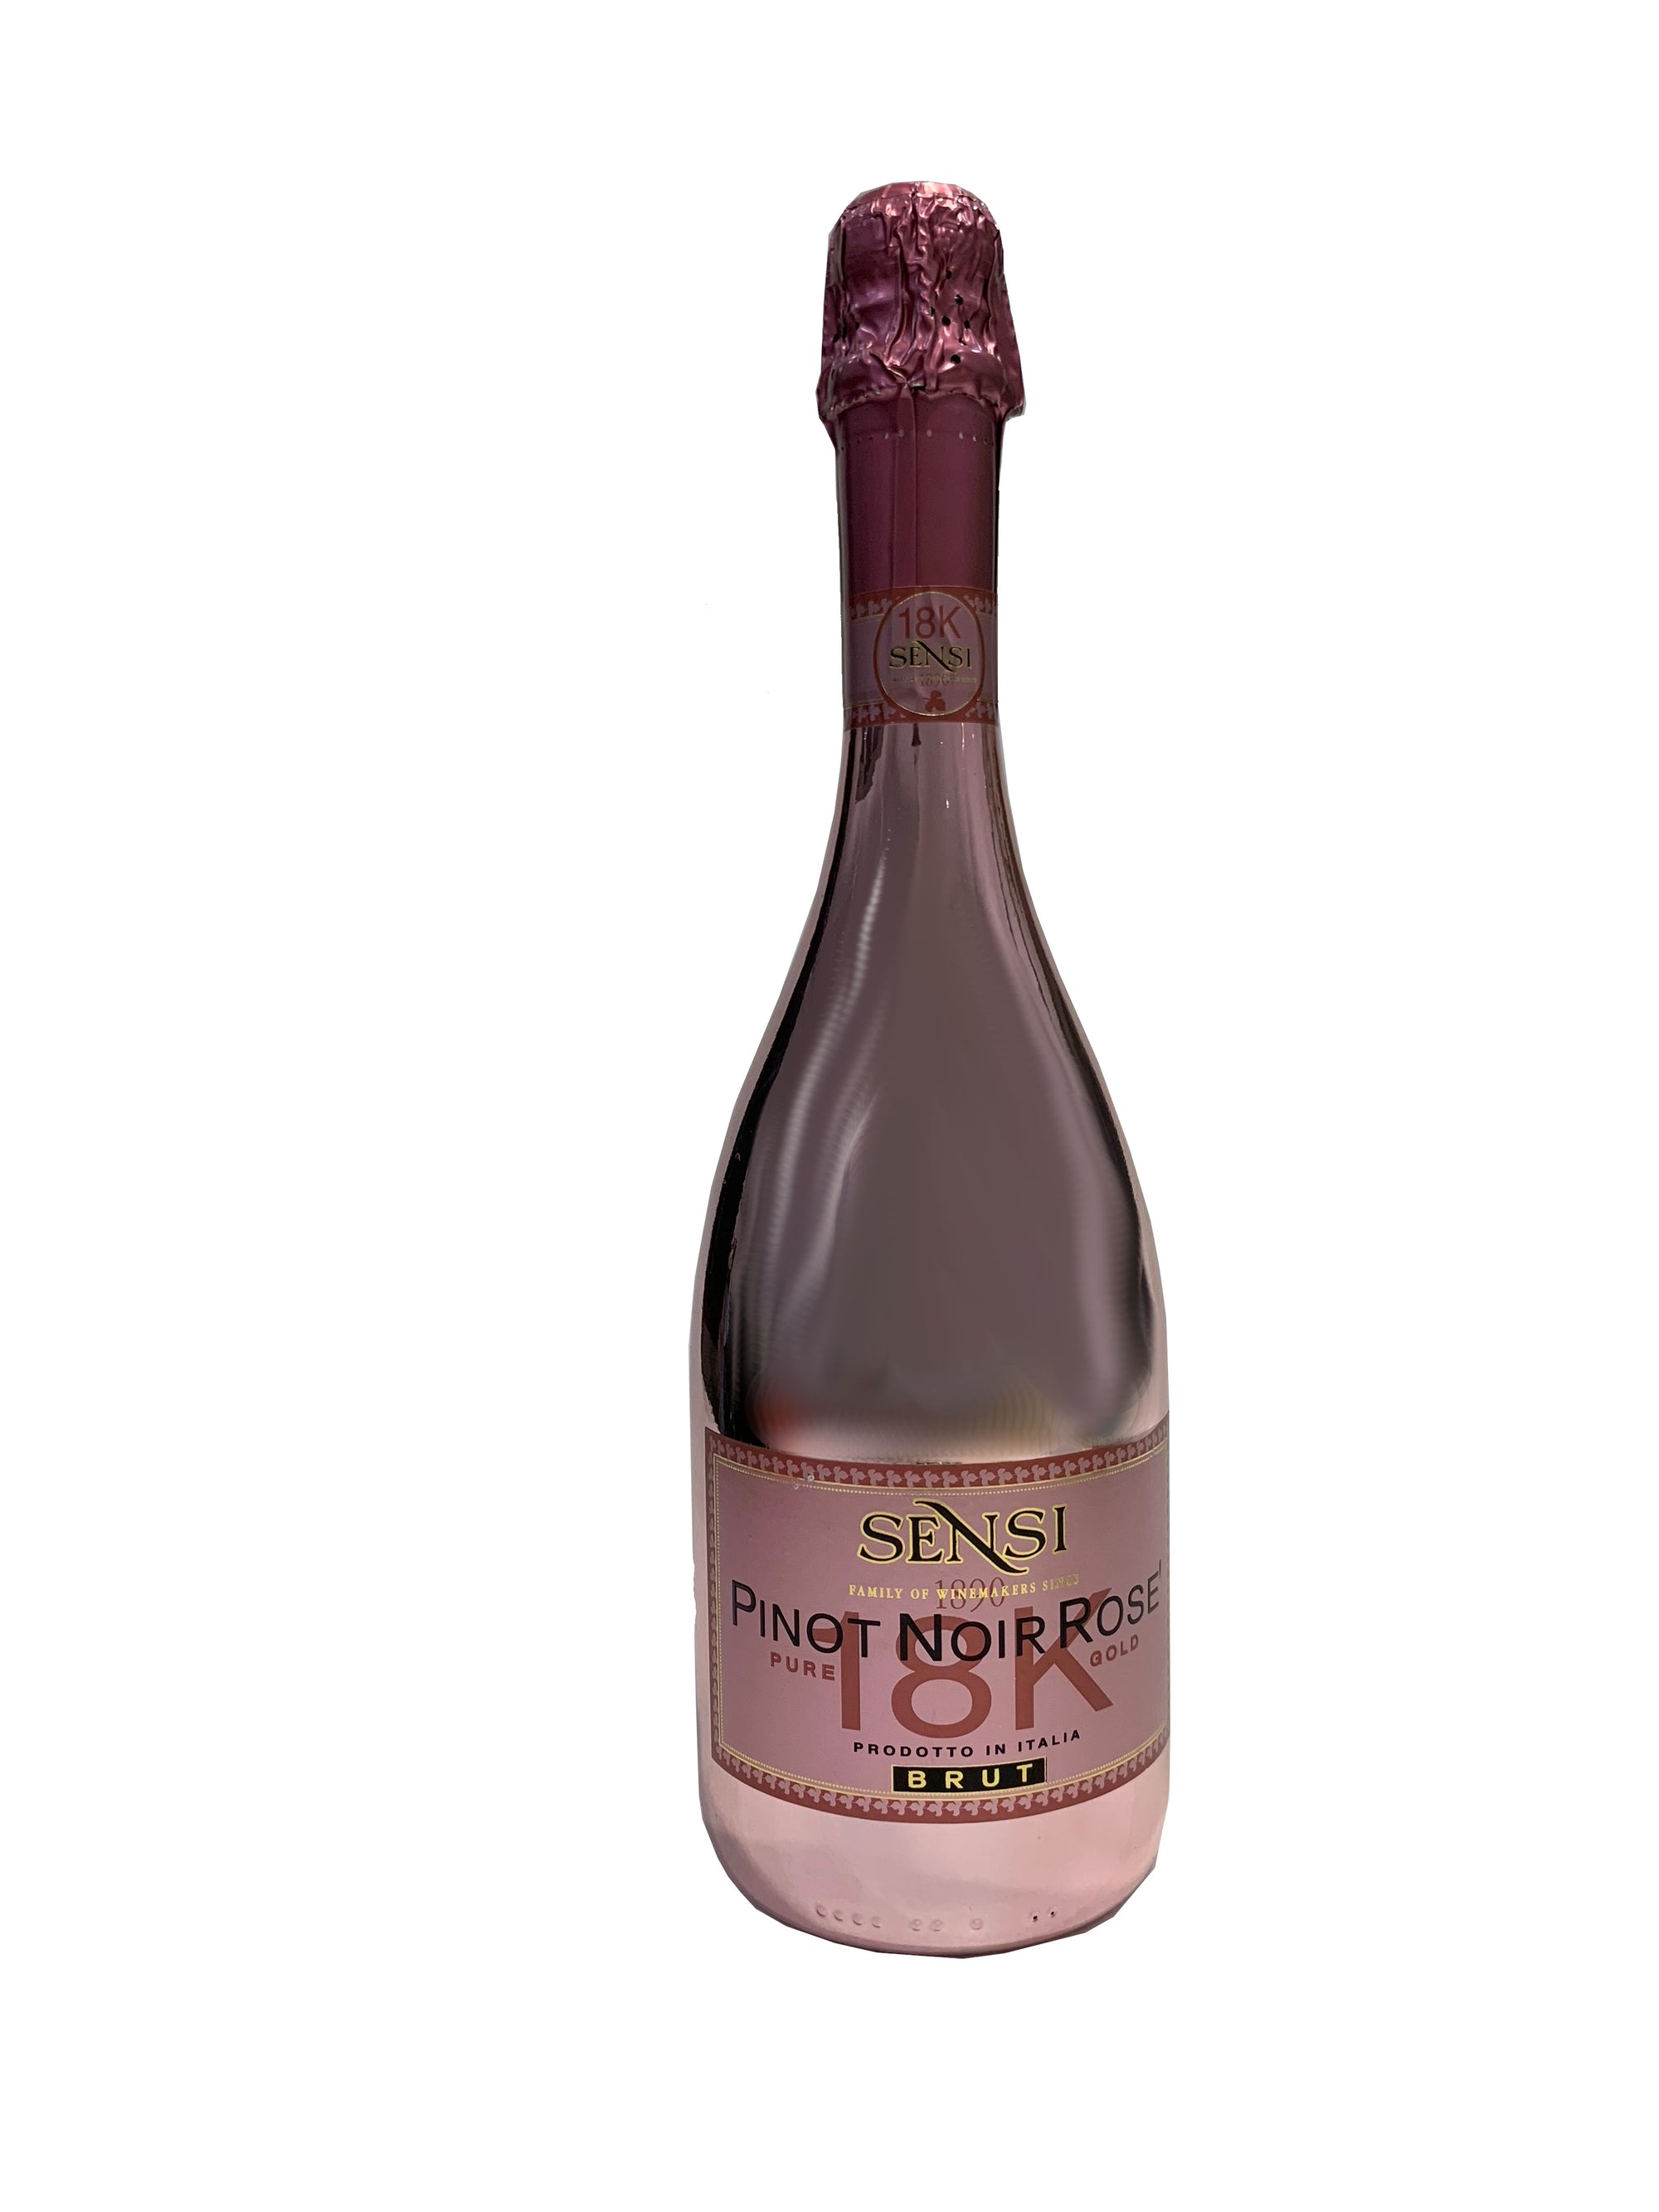 Chocolate Gift Box paired with a 750ml bottle of Sensi Pinot Noir Rose